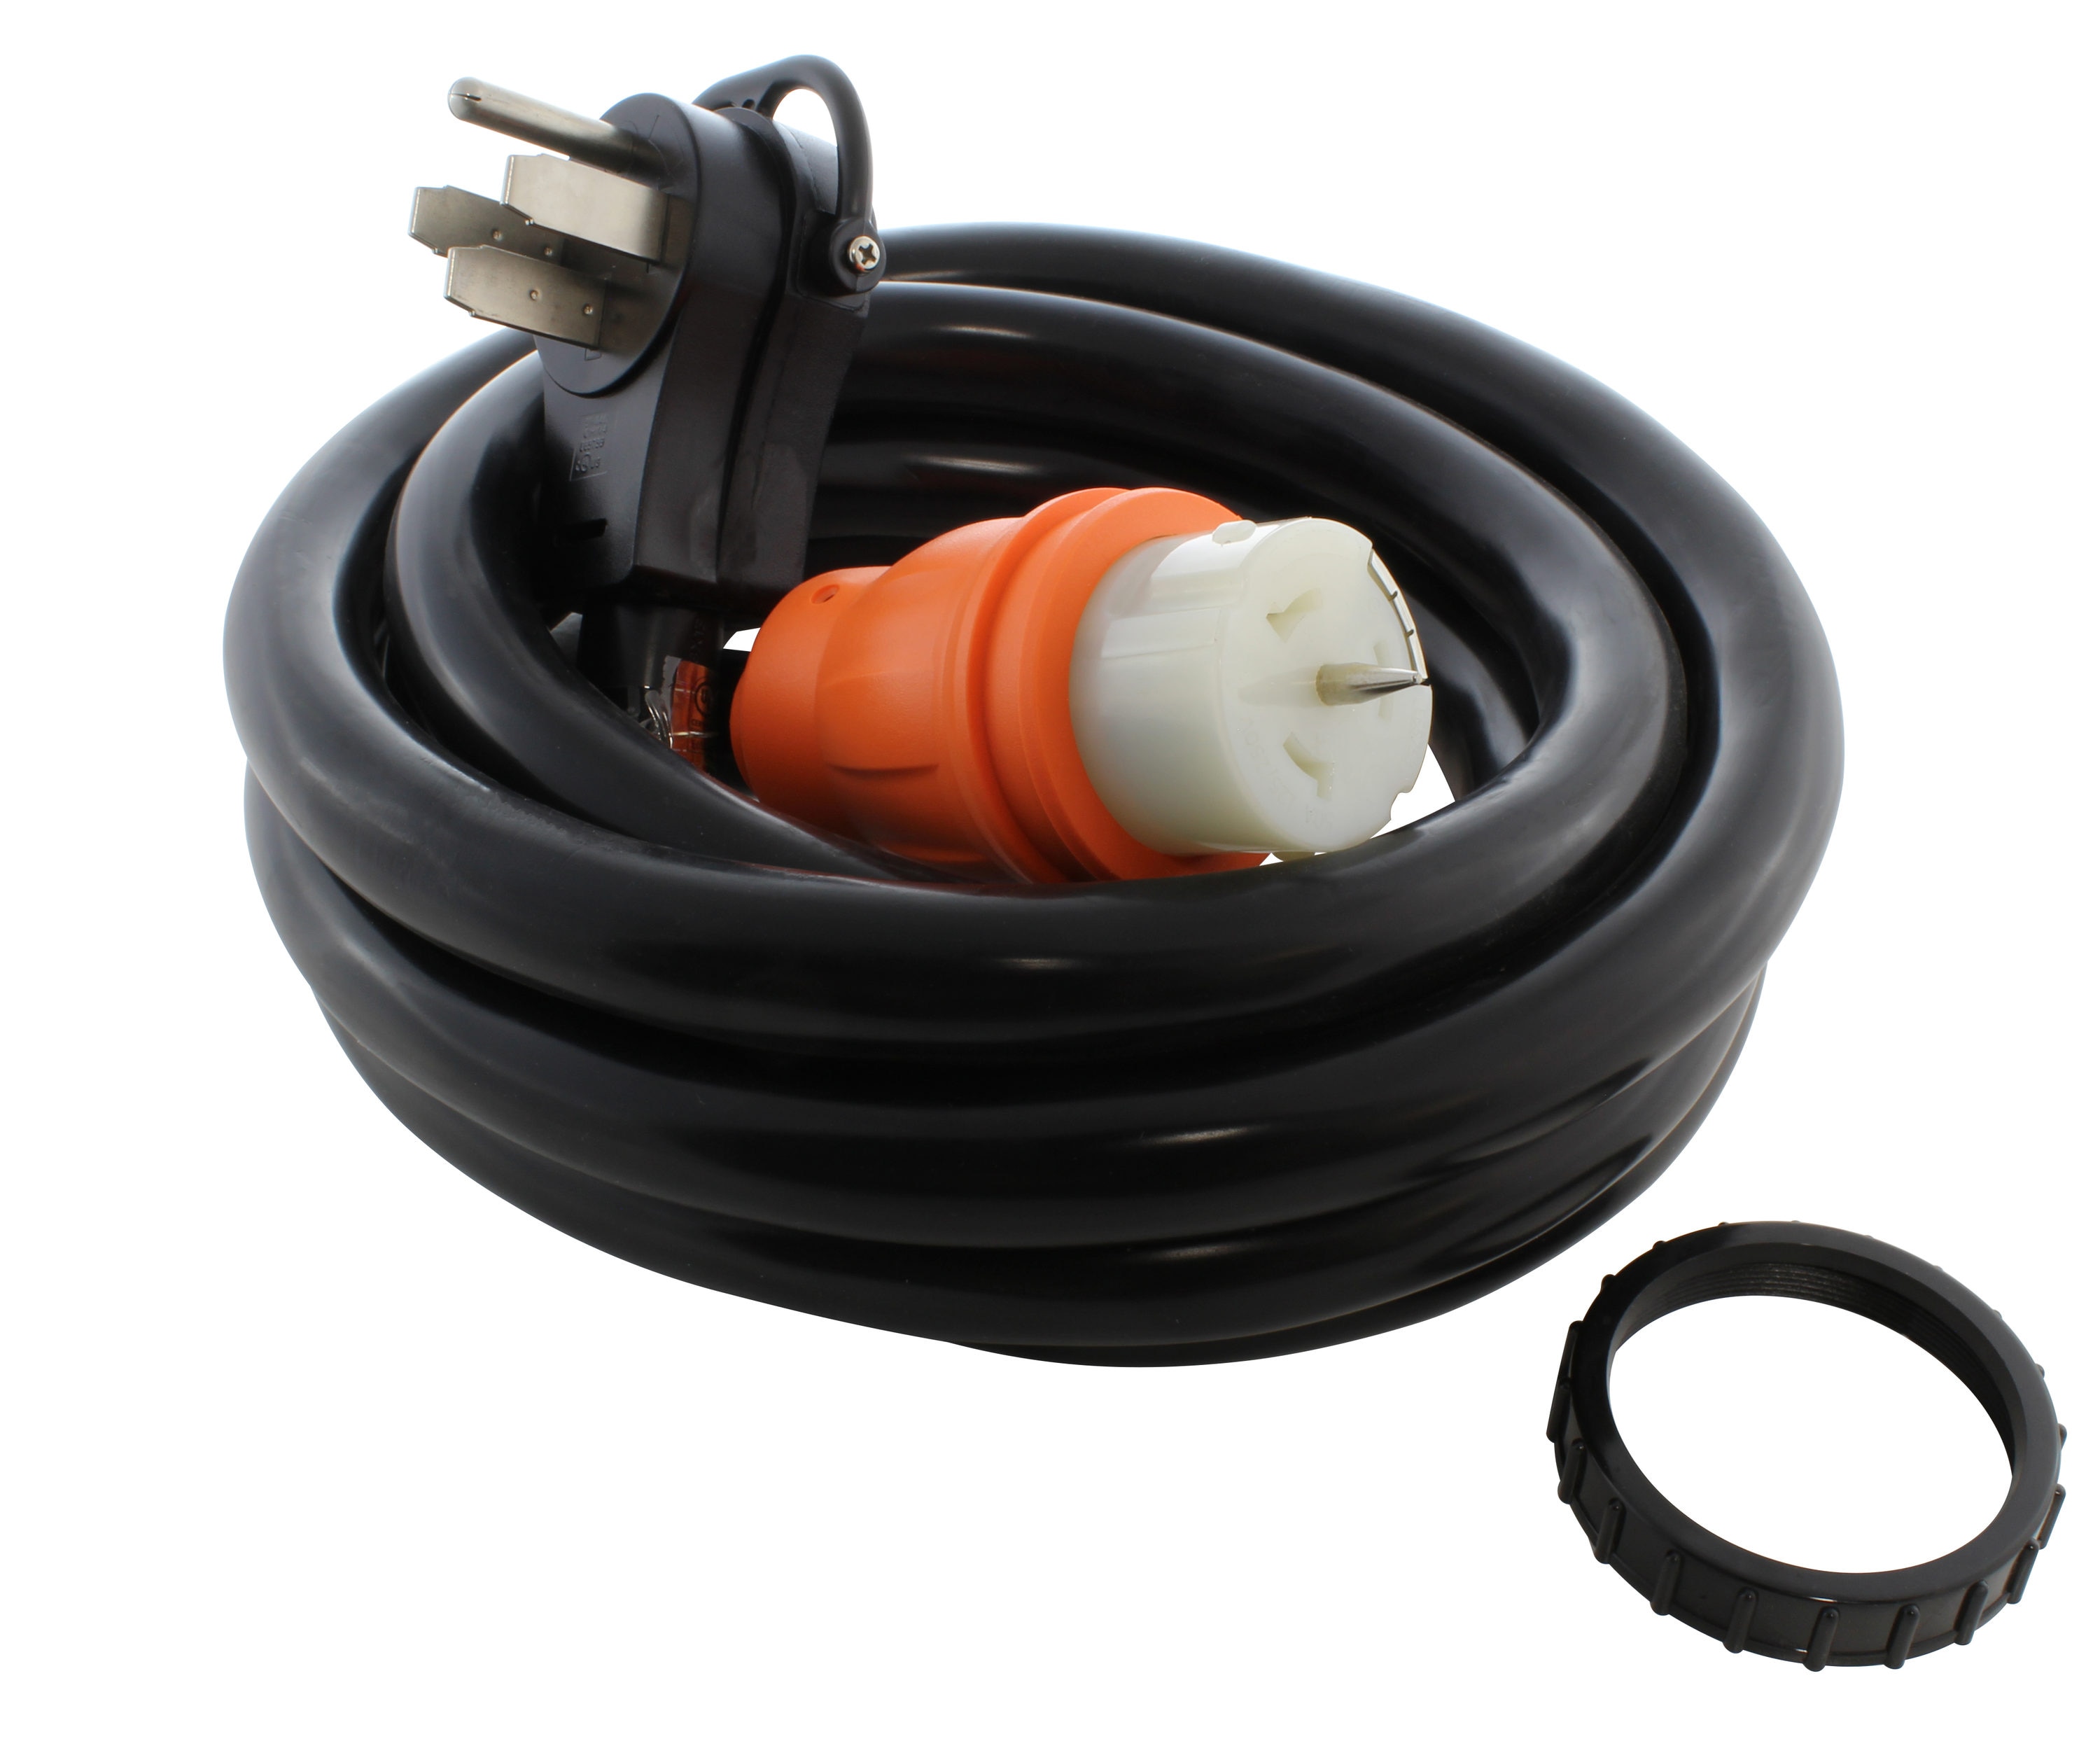 AC Works 15ft 50A Generator/Temp Power Transfer Switch Power Cord